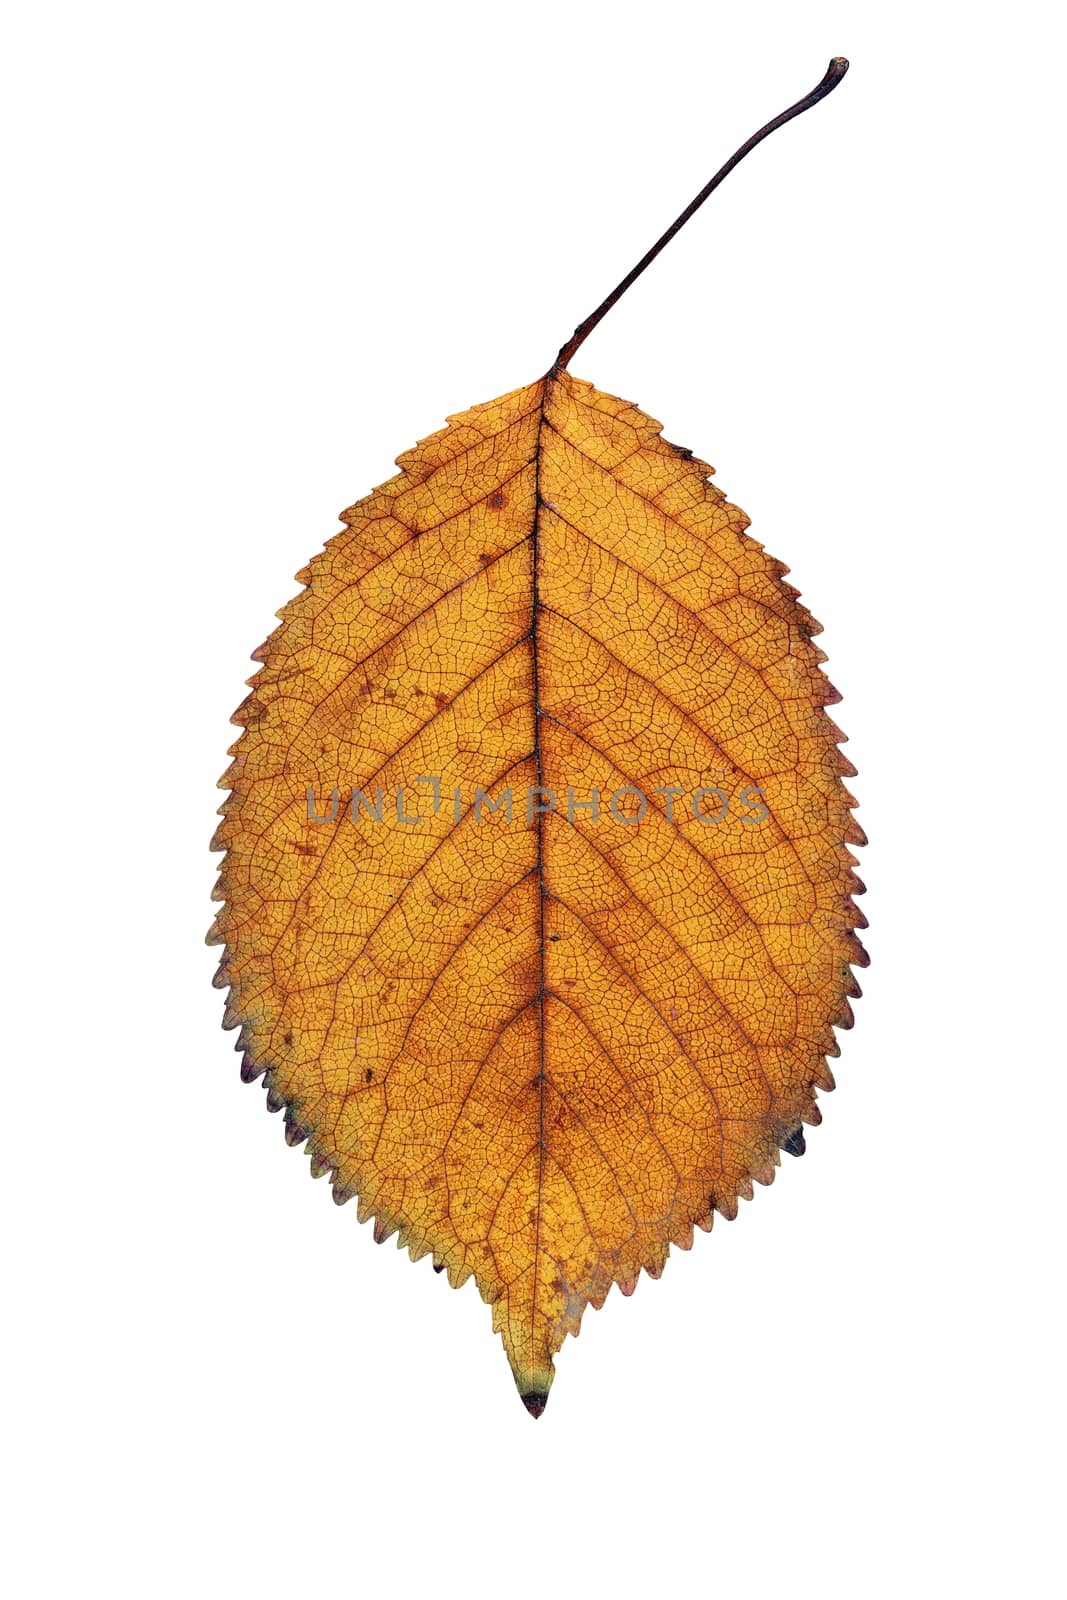 isolated gold cherry leaf detail by taviphoto